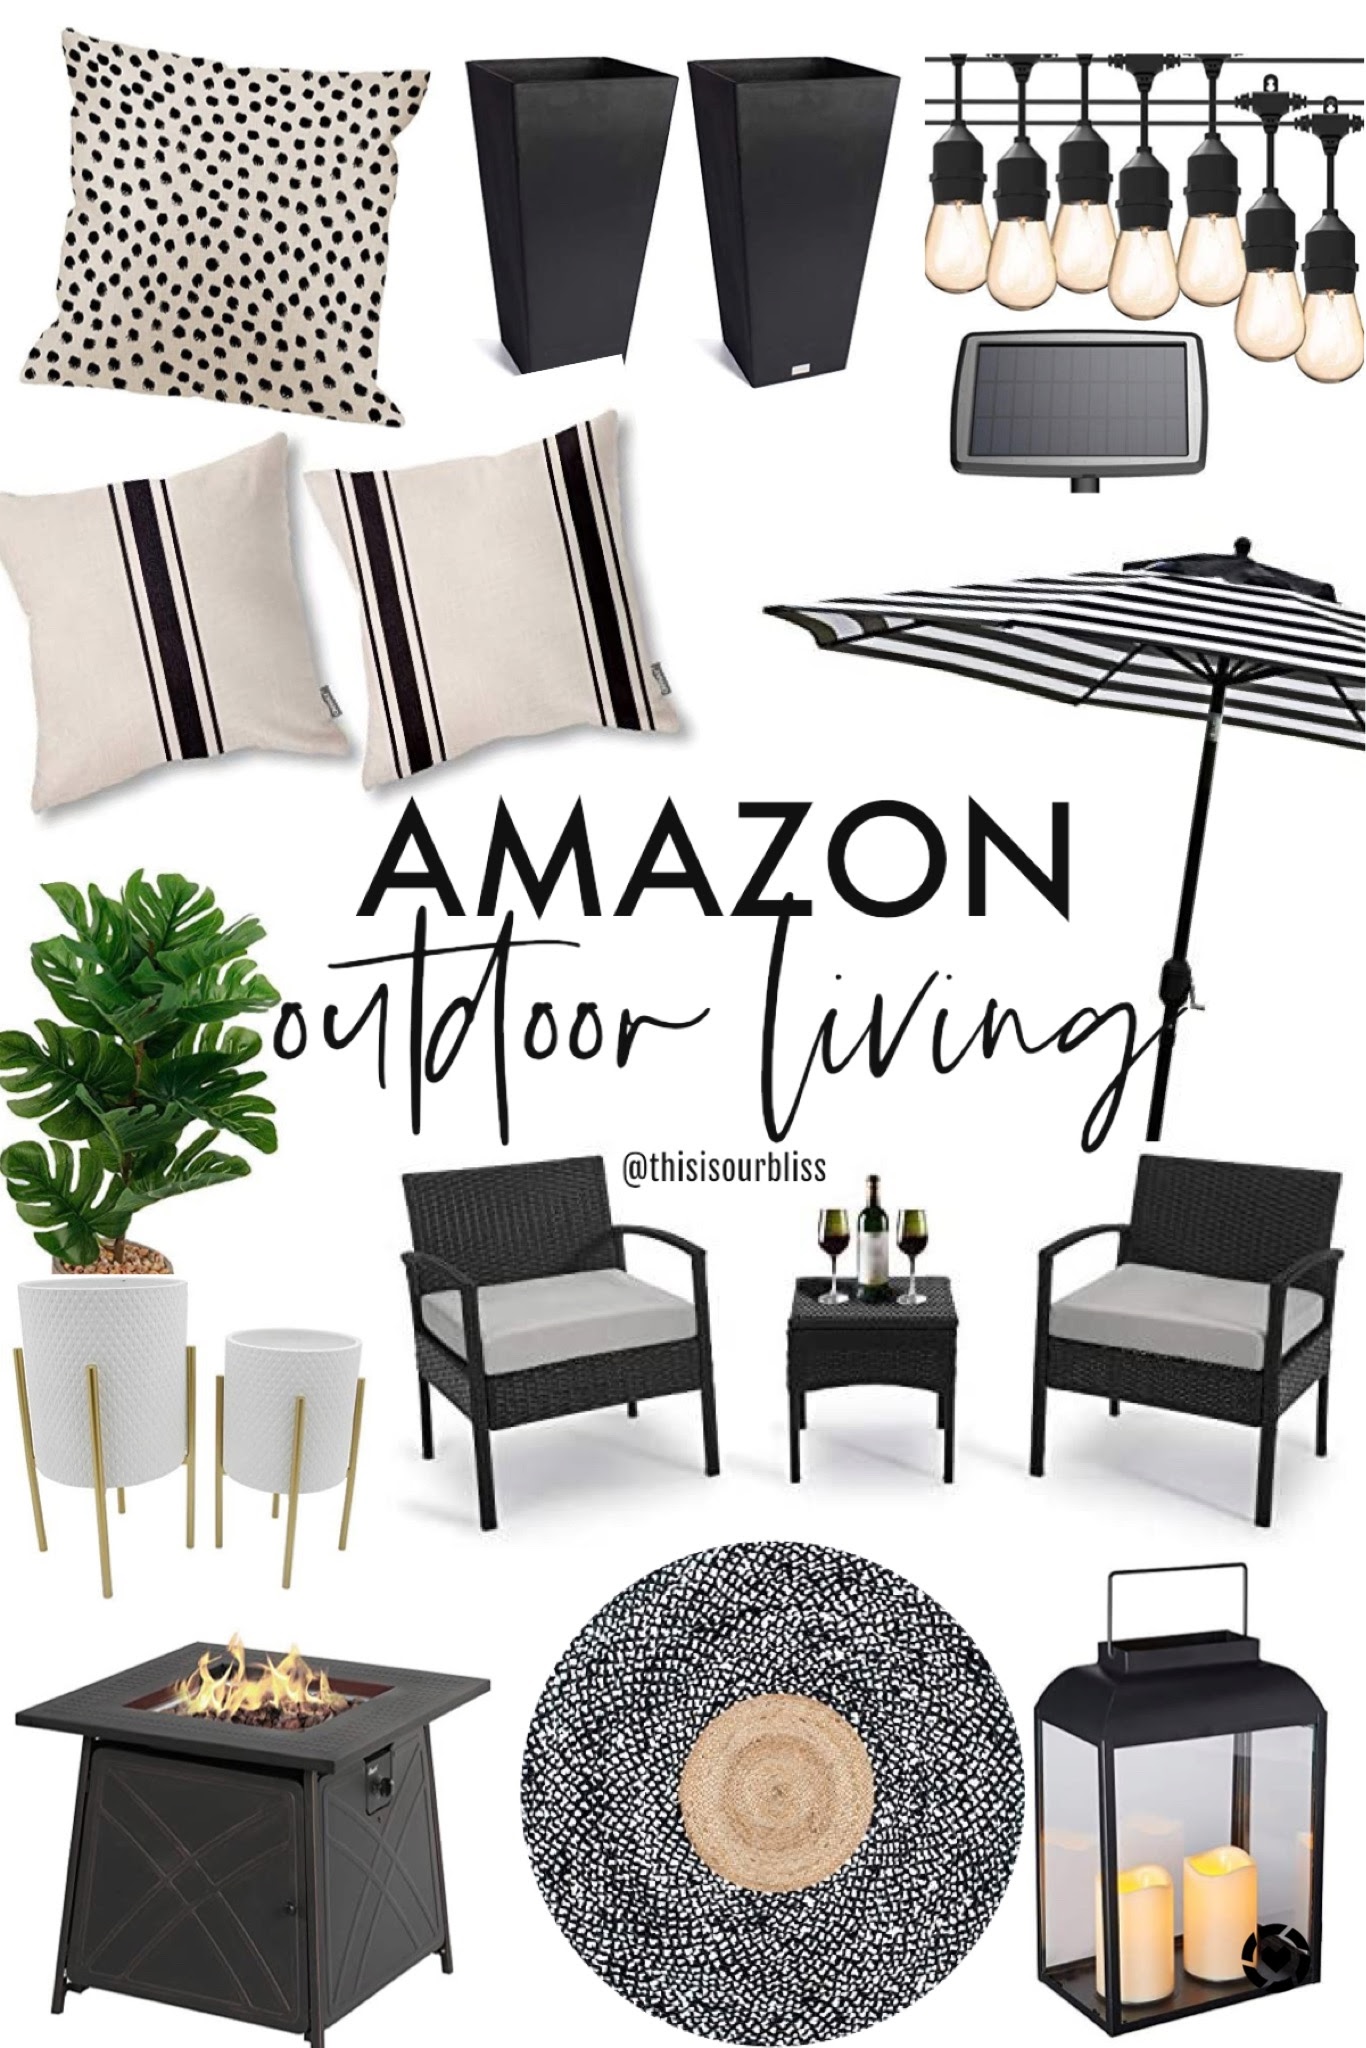 Amazon Outdoor Living - This is our Bliss #amazonoutdoorliving #amazonoutdoor #patiodecor